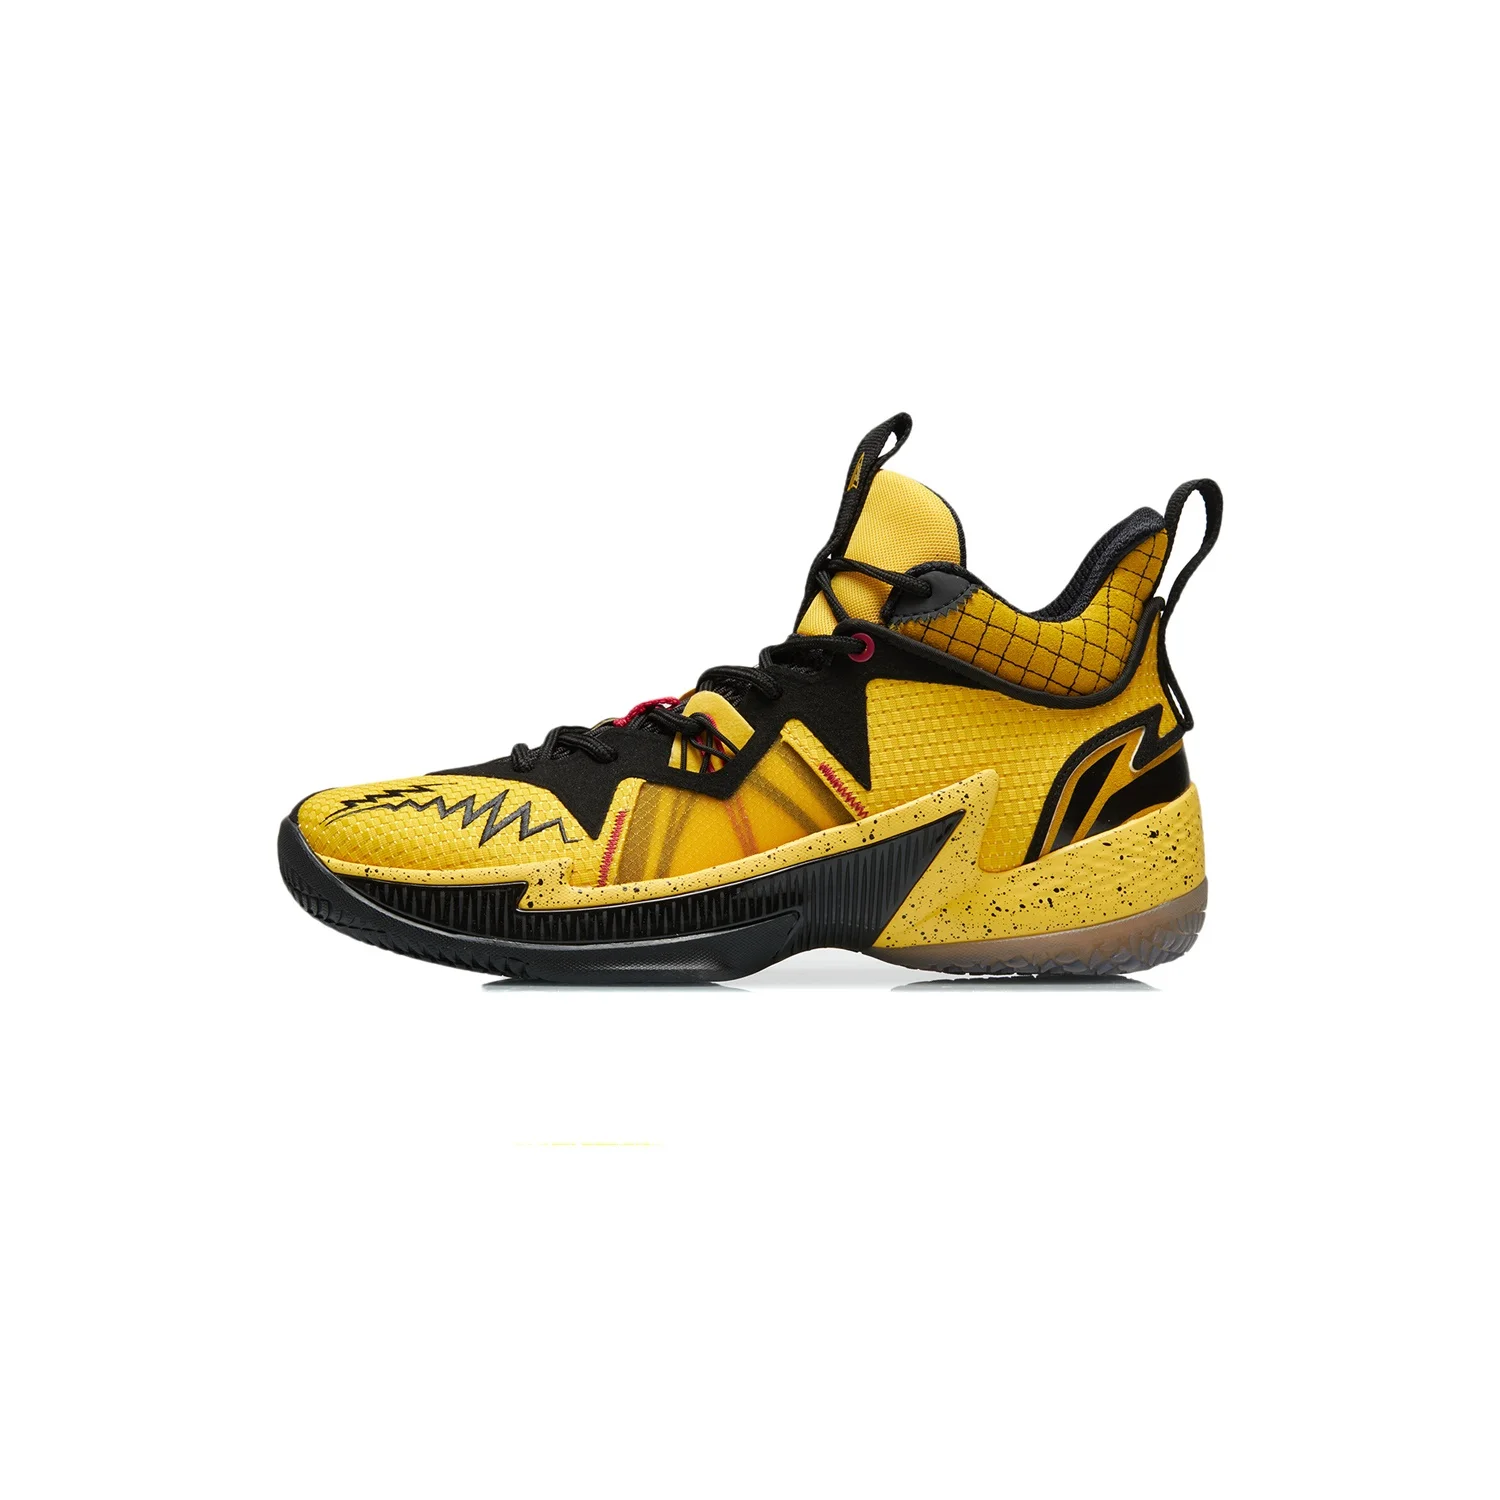 

Li-Ning basketball shoes men's shoes 2021 new official sports shoes professional boots middle top actual combat shoes